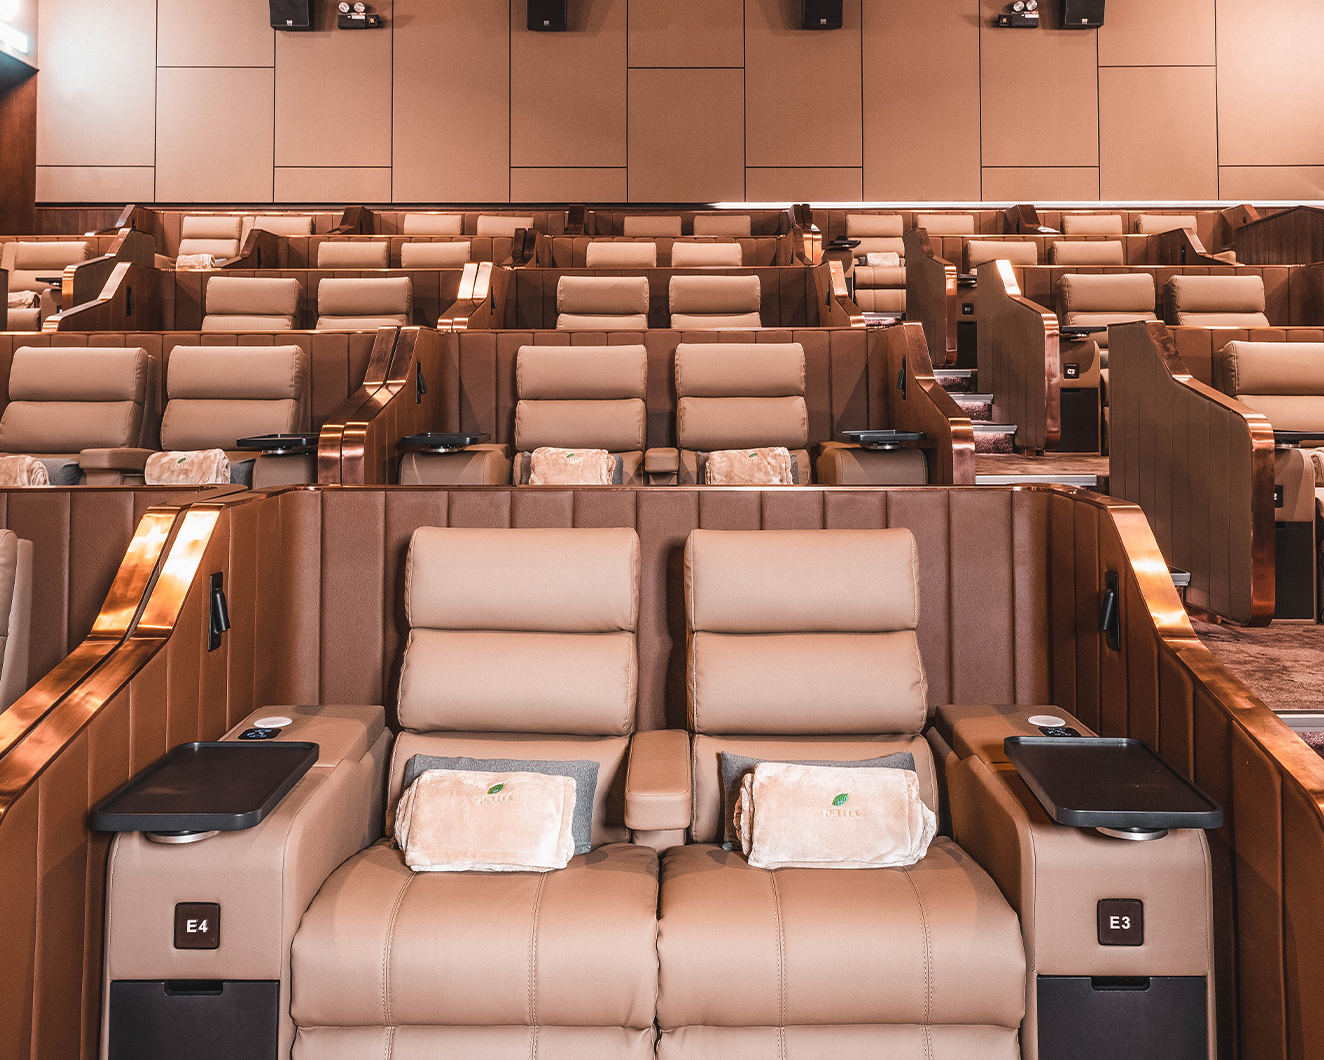 Aurum Theatre Gold Class experience, the Comfort Cabins